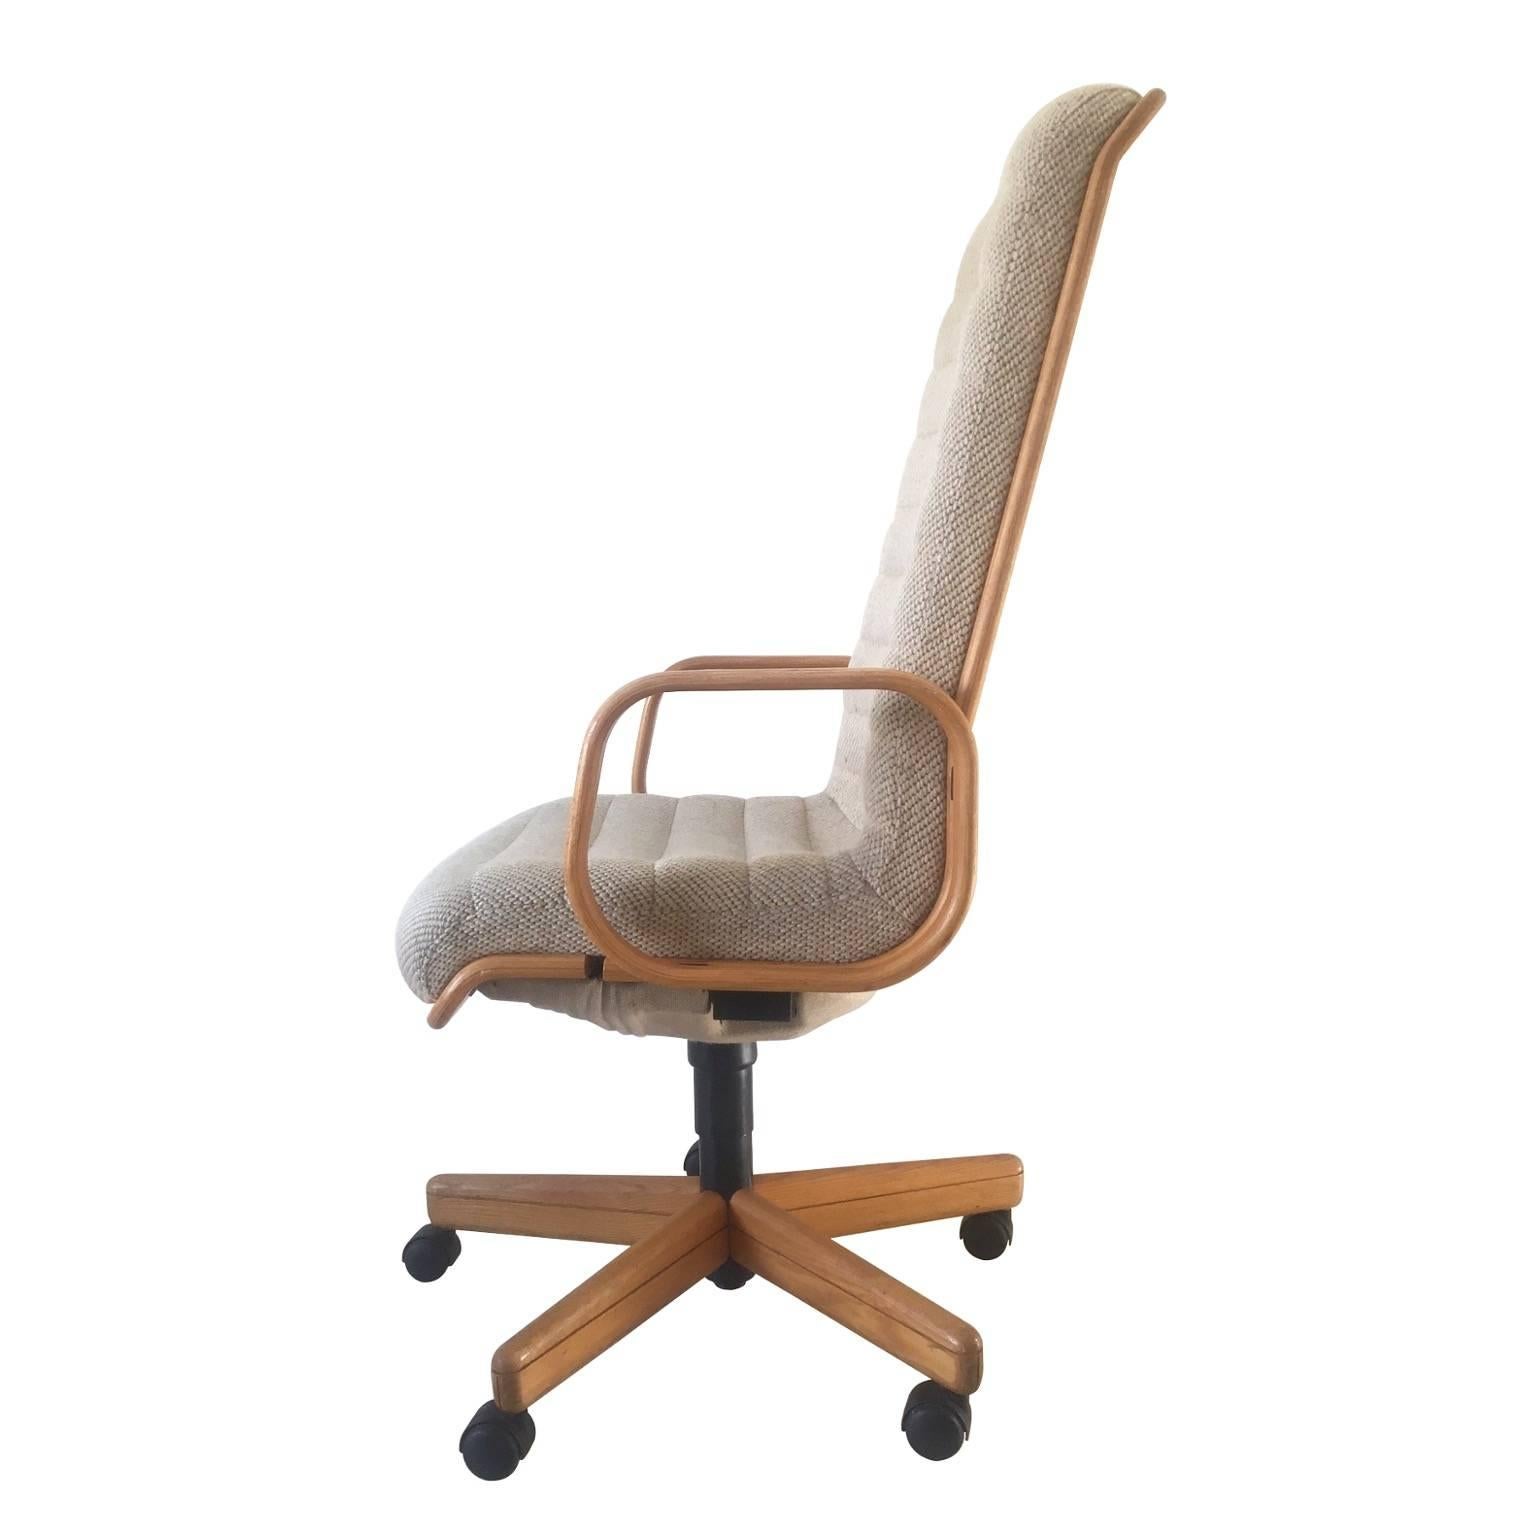 Executive Natural Desk Chair by Martin Stoll for Giroflex, 1970s at 1stDibs  | martin stoll office chair, martin stoll furniture, martin stoll chair